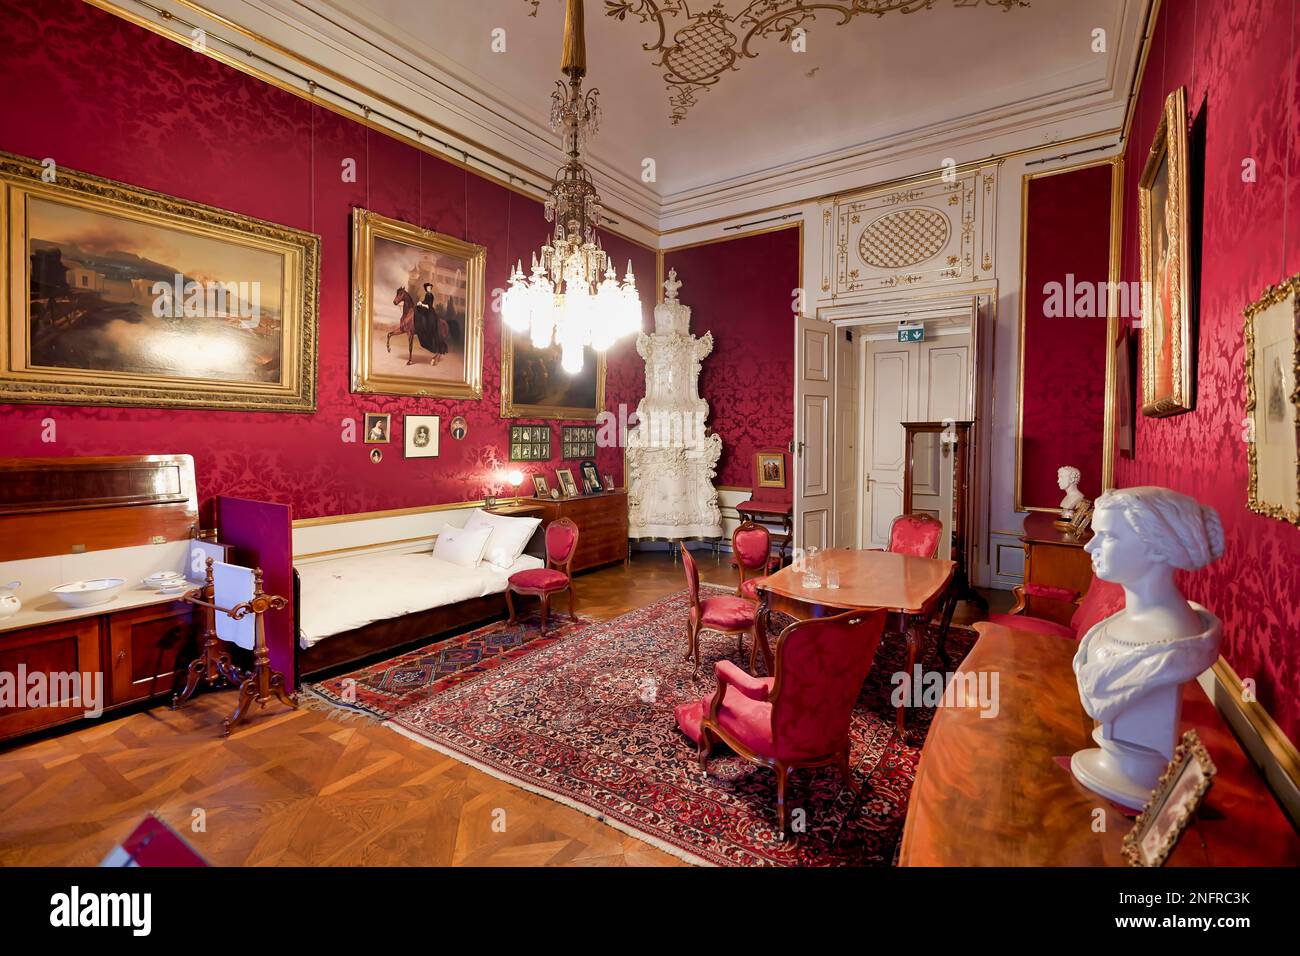 Kaiserappartements Hofburg Imperial Palace Sissi. Vienna Austria Stock  Photo - Alamy